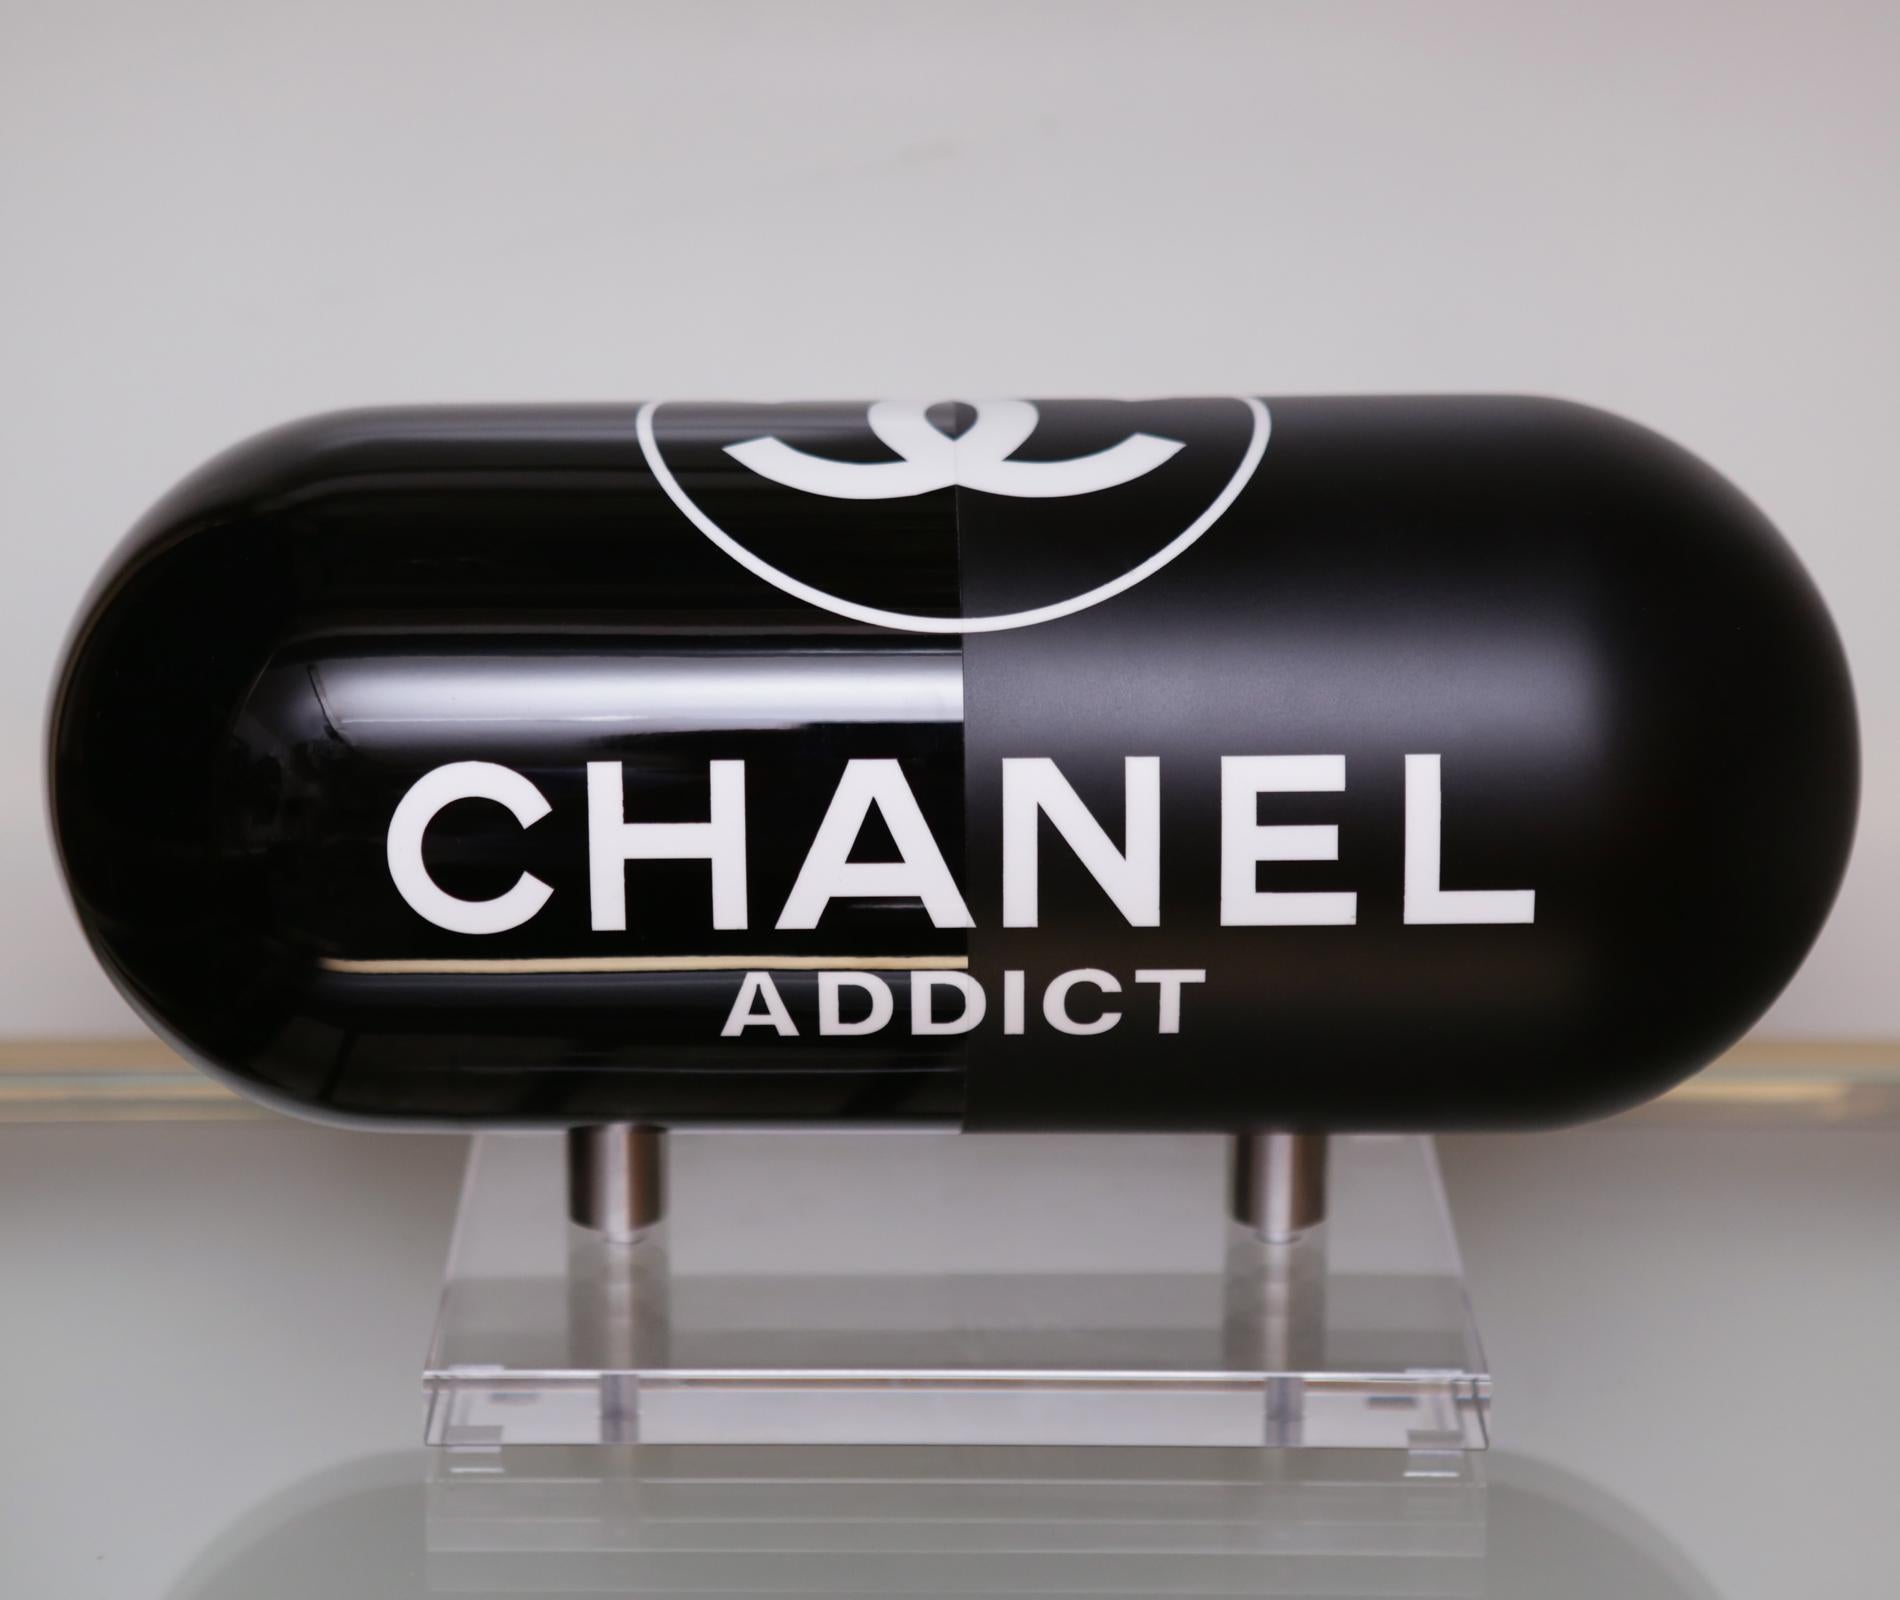 Sculpture Pill Chanel Addict Black in resin
with one side in glossy black finish and 
one side in matt black finish. On plexiglass
acrylic base. Numberded 1/12.
Limited Edition of 12 pieces.